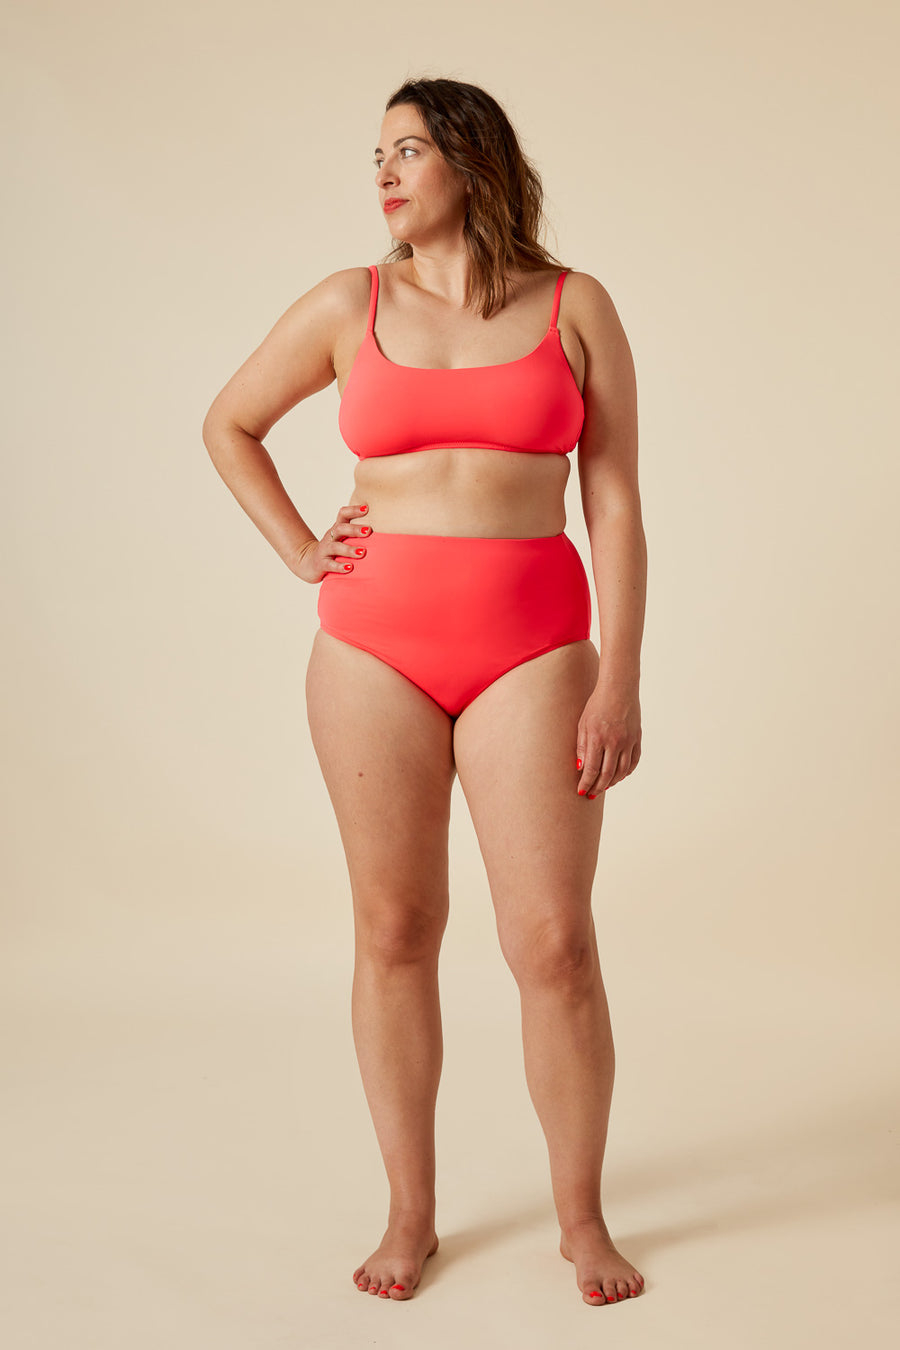 Plus Size Thong Swimsuit -  Canada